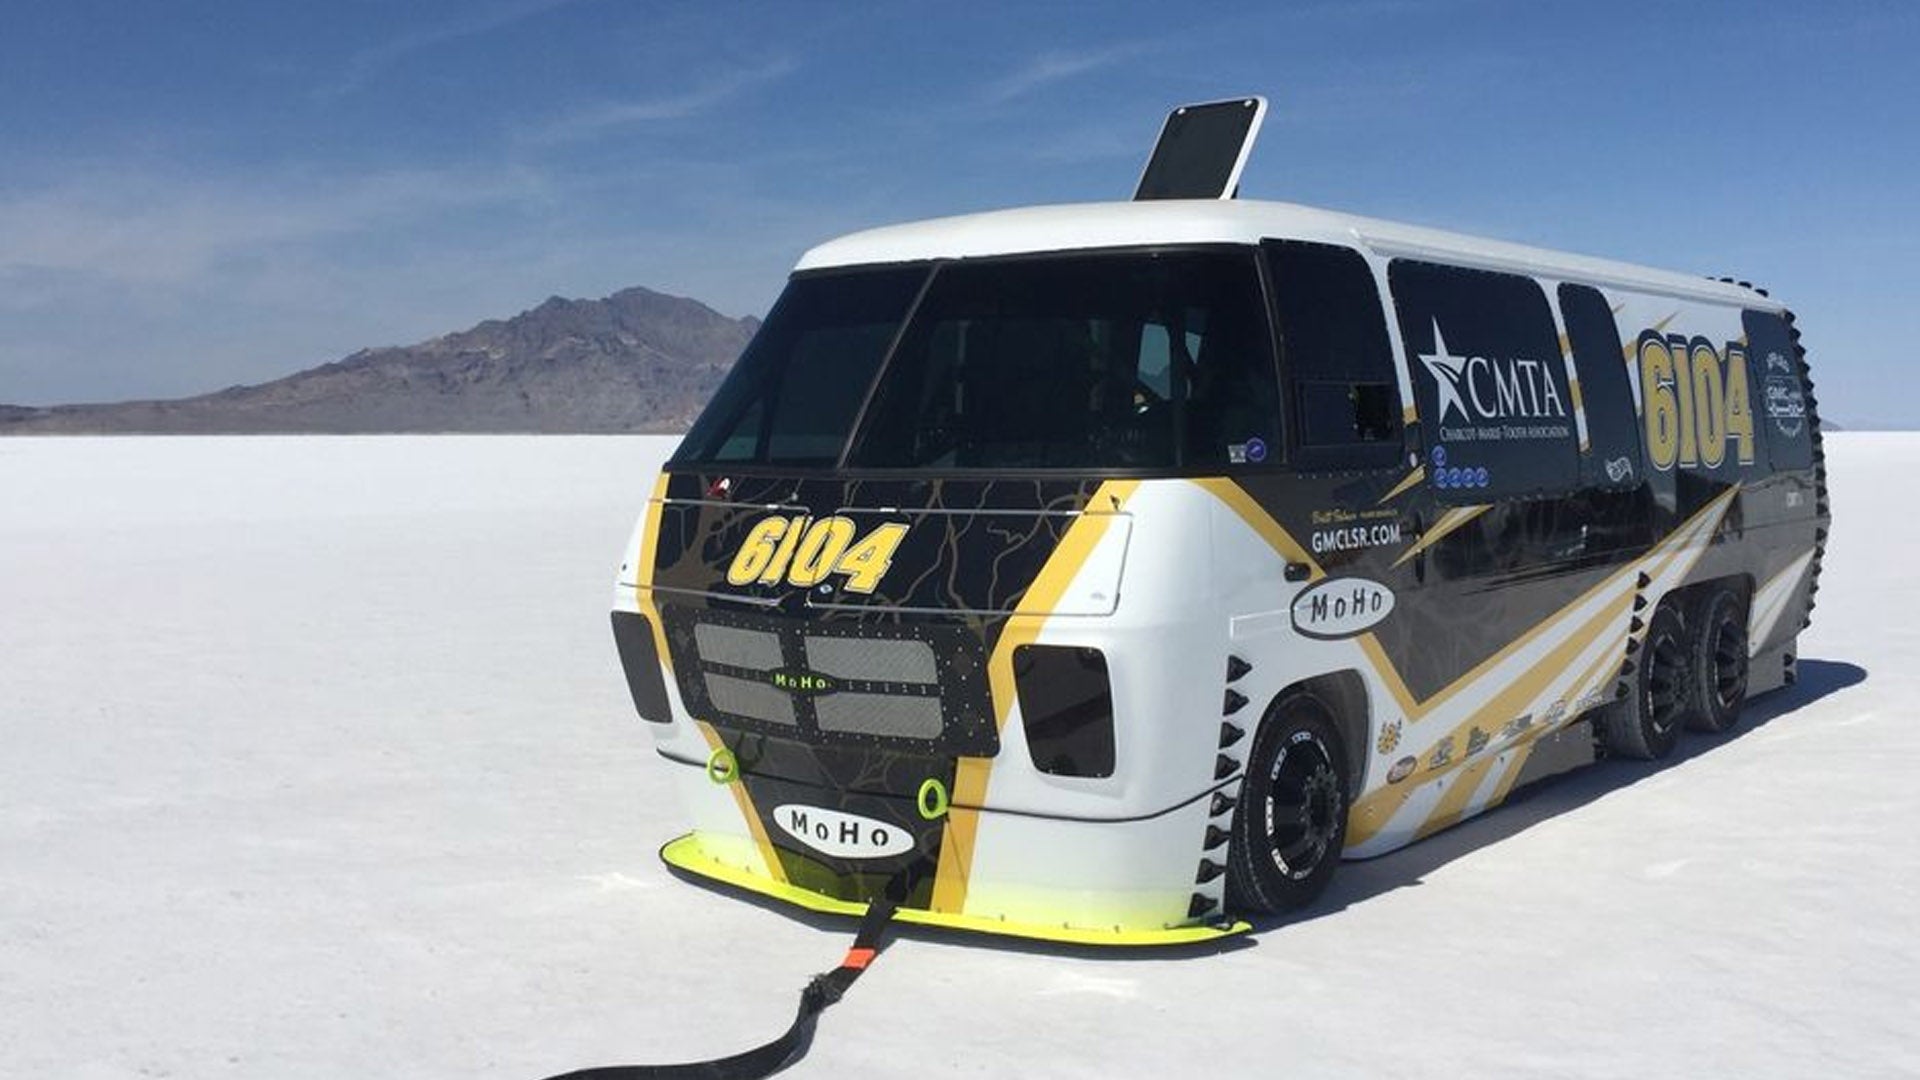 The world’s fastest RV could be yours for $95,000